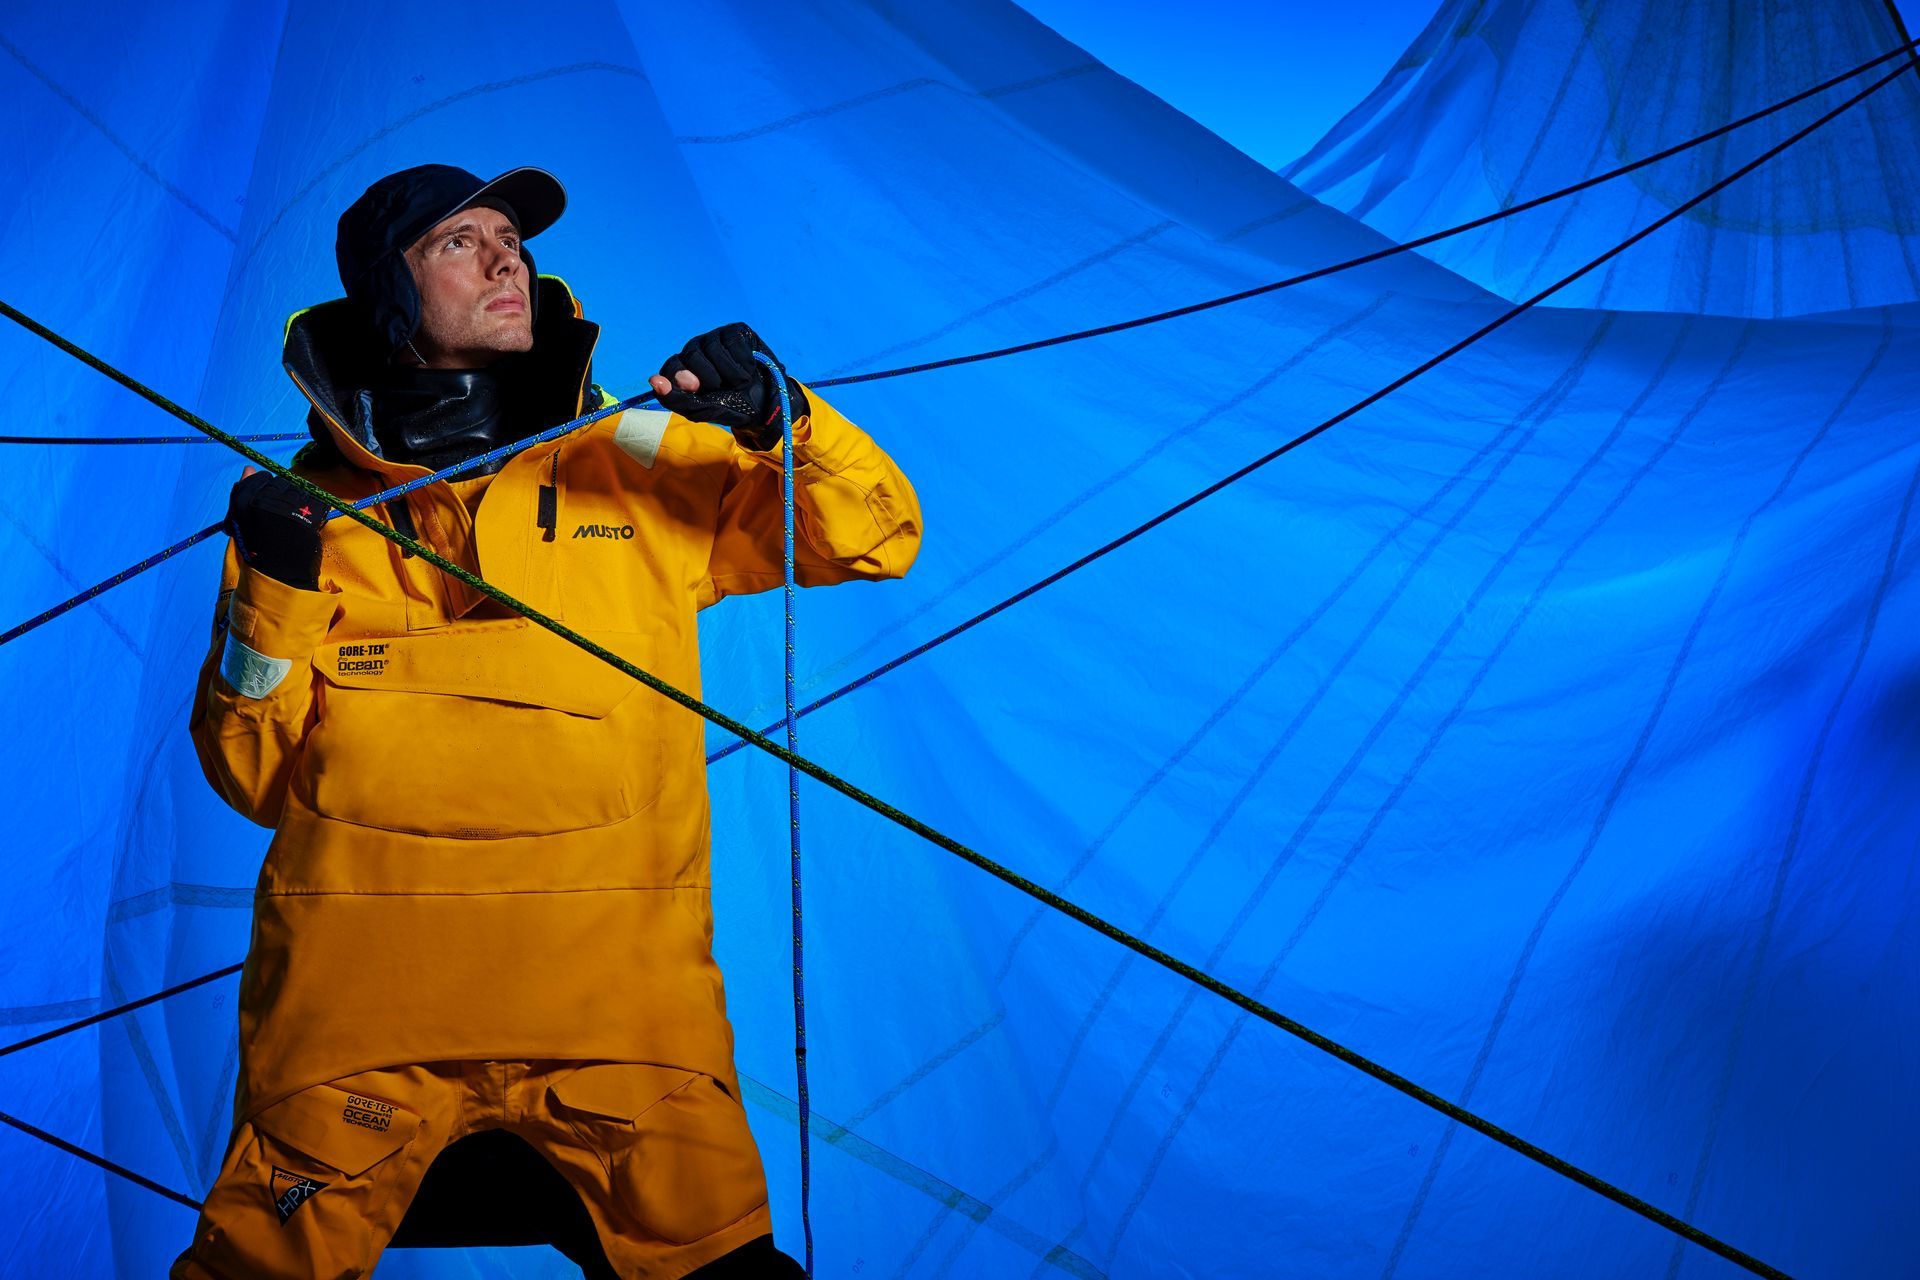 a man in a yellow suit is standing in front of a blue sail .